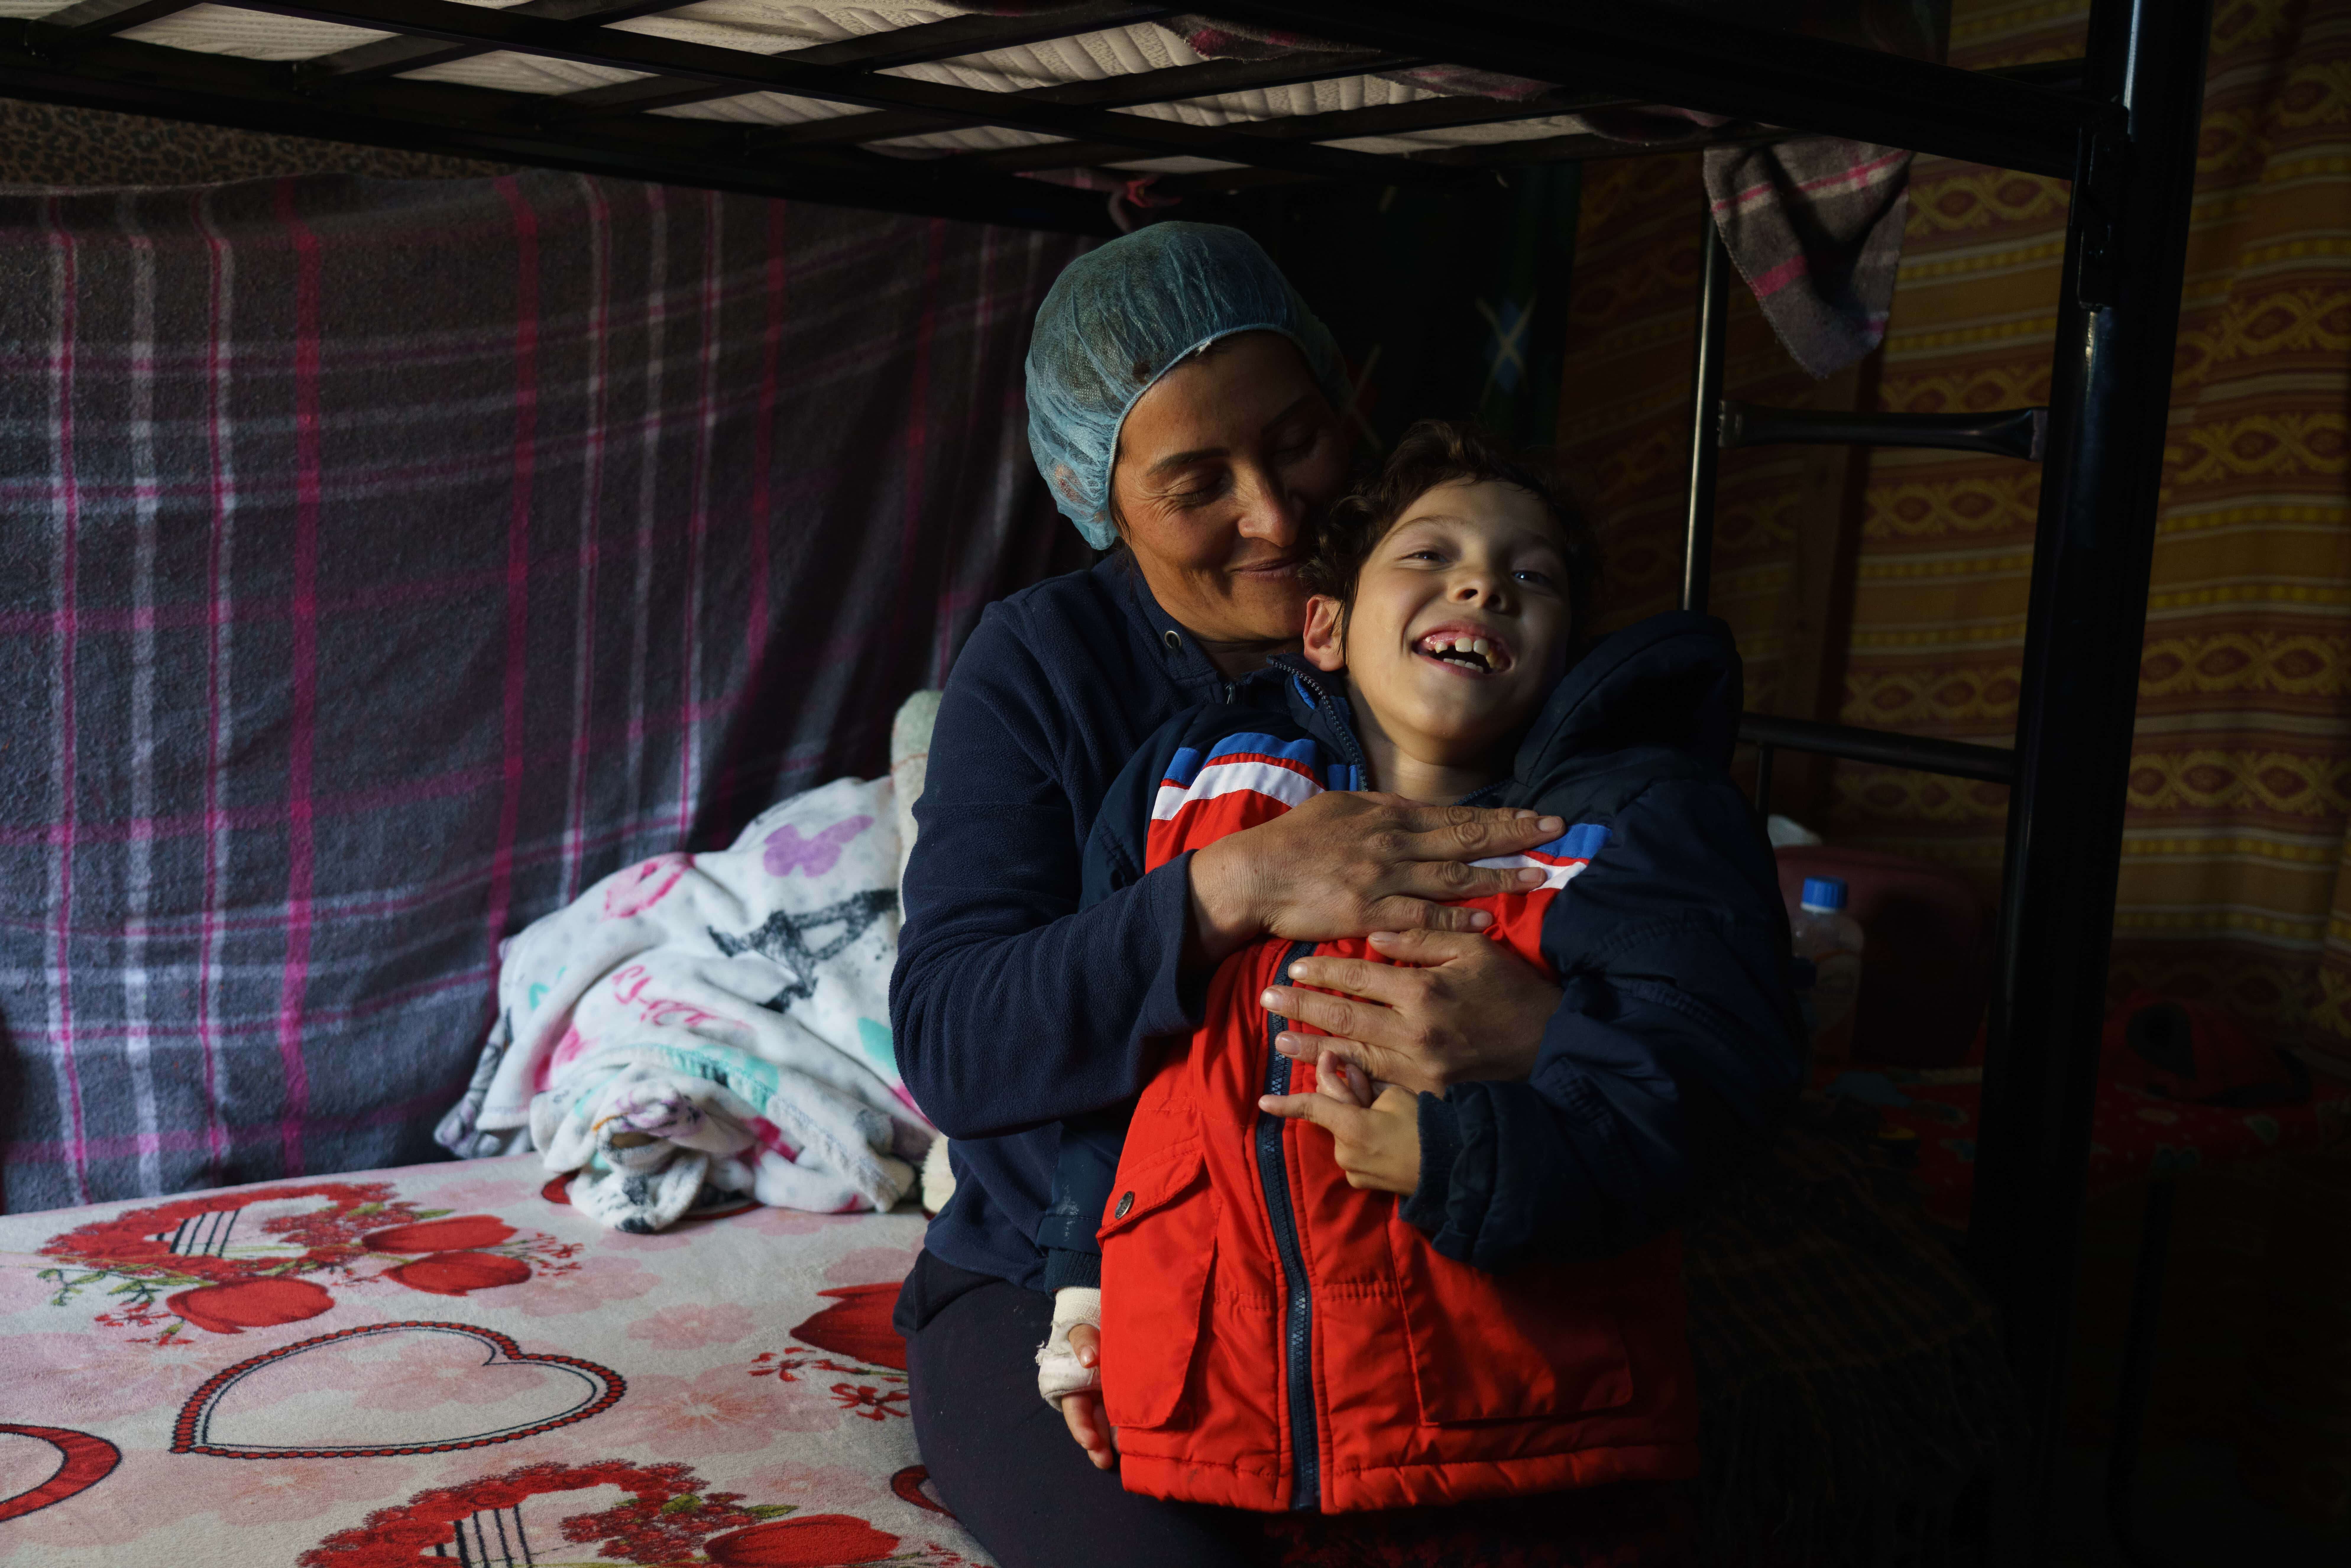 Sara*, 36, from southern Mexico, is pictured with her nine-year-old son in her bunk at Oasis del Migrante shelter in Ciudad Juárez. Sara has been waiting for an appointment via the CBP One application to seek entry into the United States with her sons, hoping to get better medical care for her nine-year-old son’s cerebral palsy. 